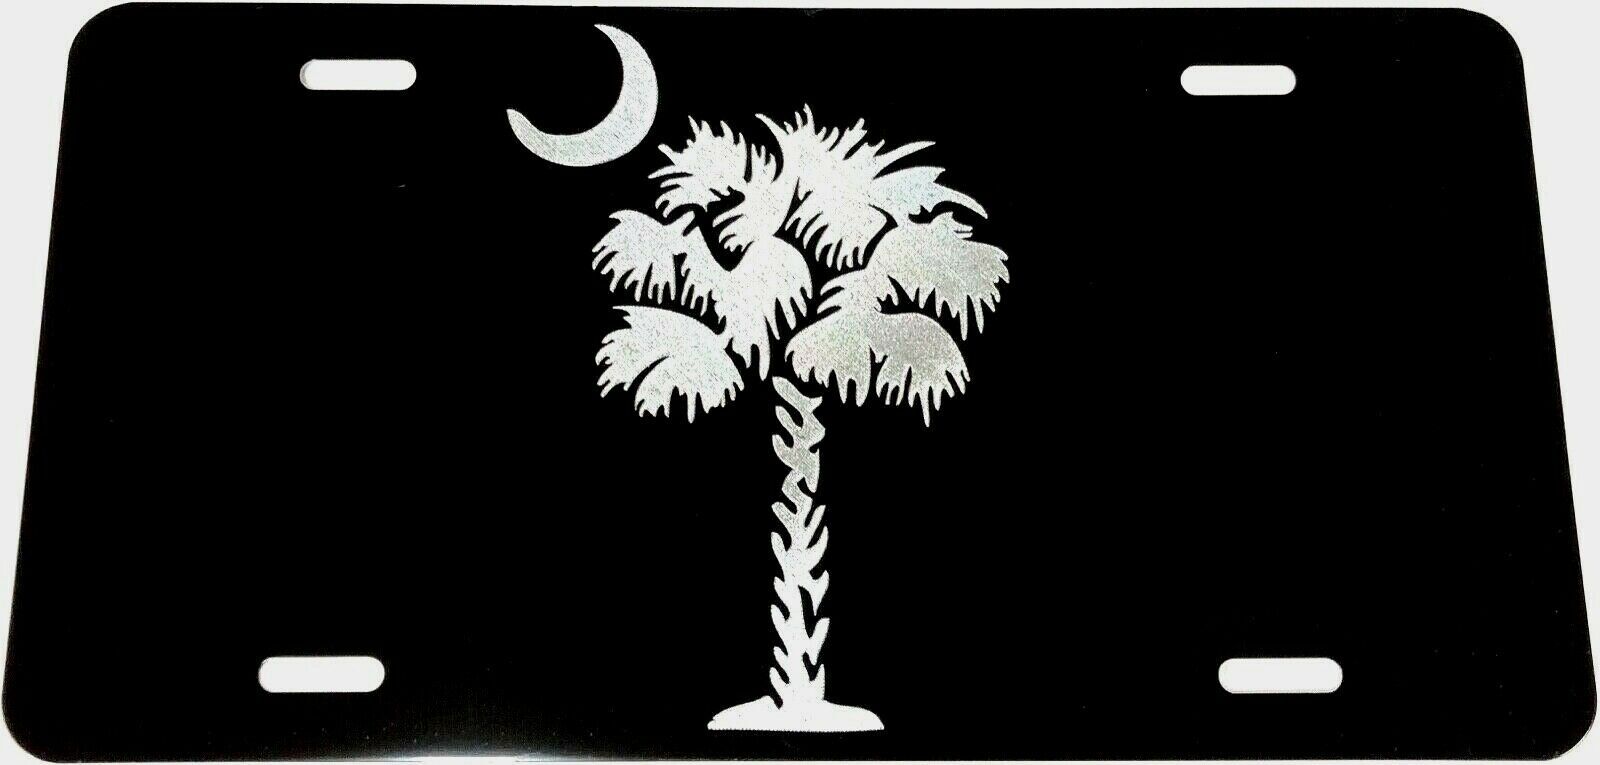 SC Palmetto Logo / Flag Diamond Etched Engraved Blk License Plate Tag Best Gift